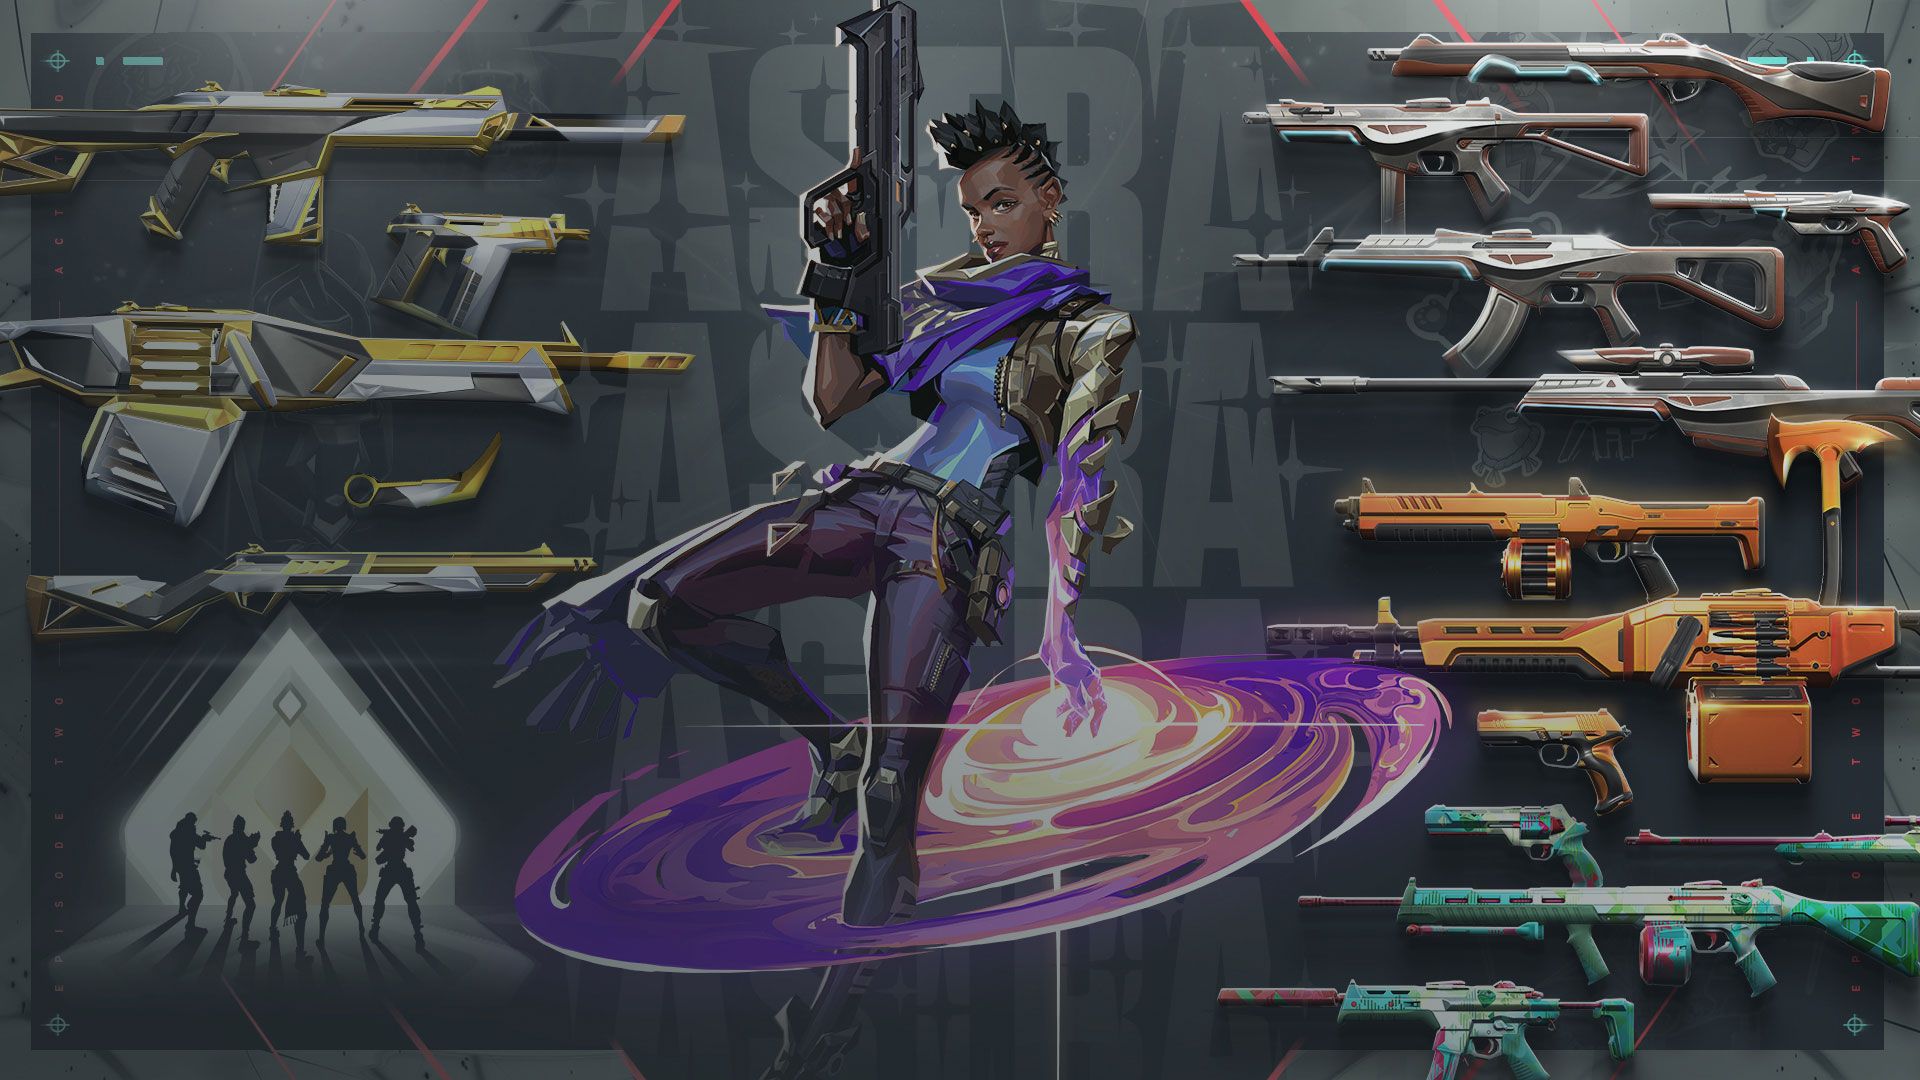 VALORANT: Riot Games' Competitive 5v5 Character Based Tactical Shooter